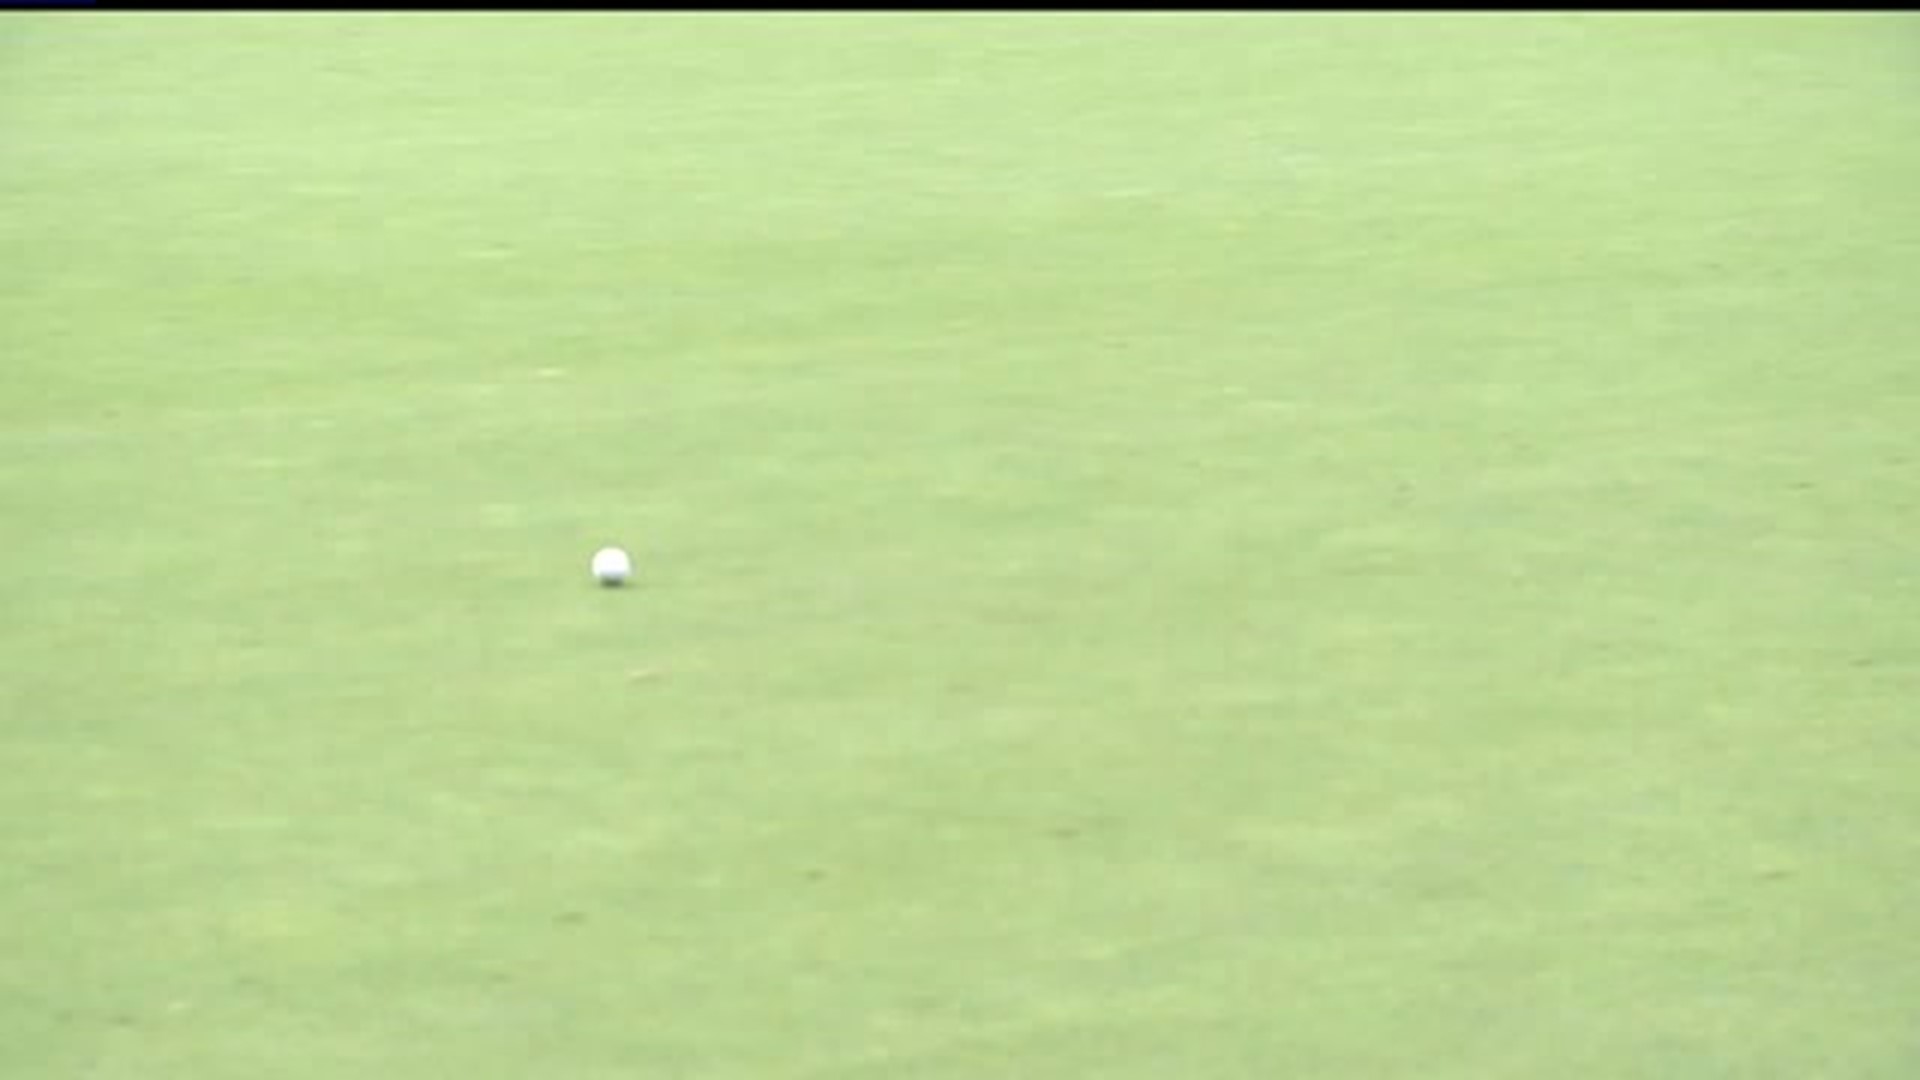 FOX 43 Golf Tip of The Week: The Bump-and-Run